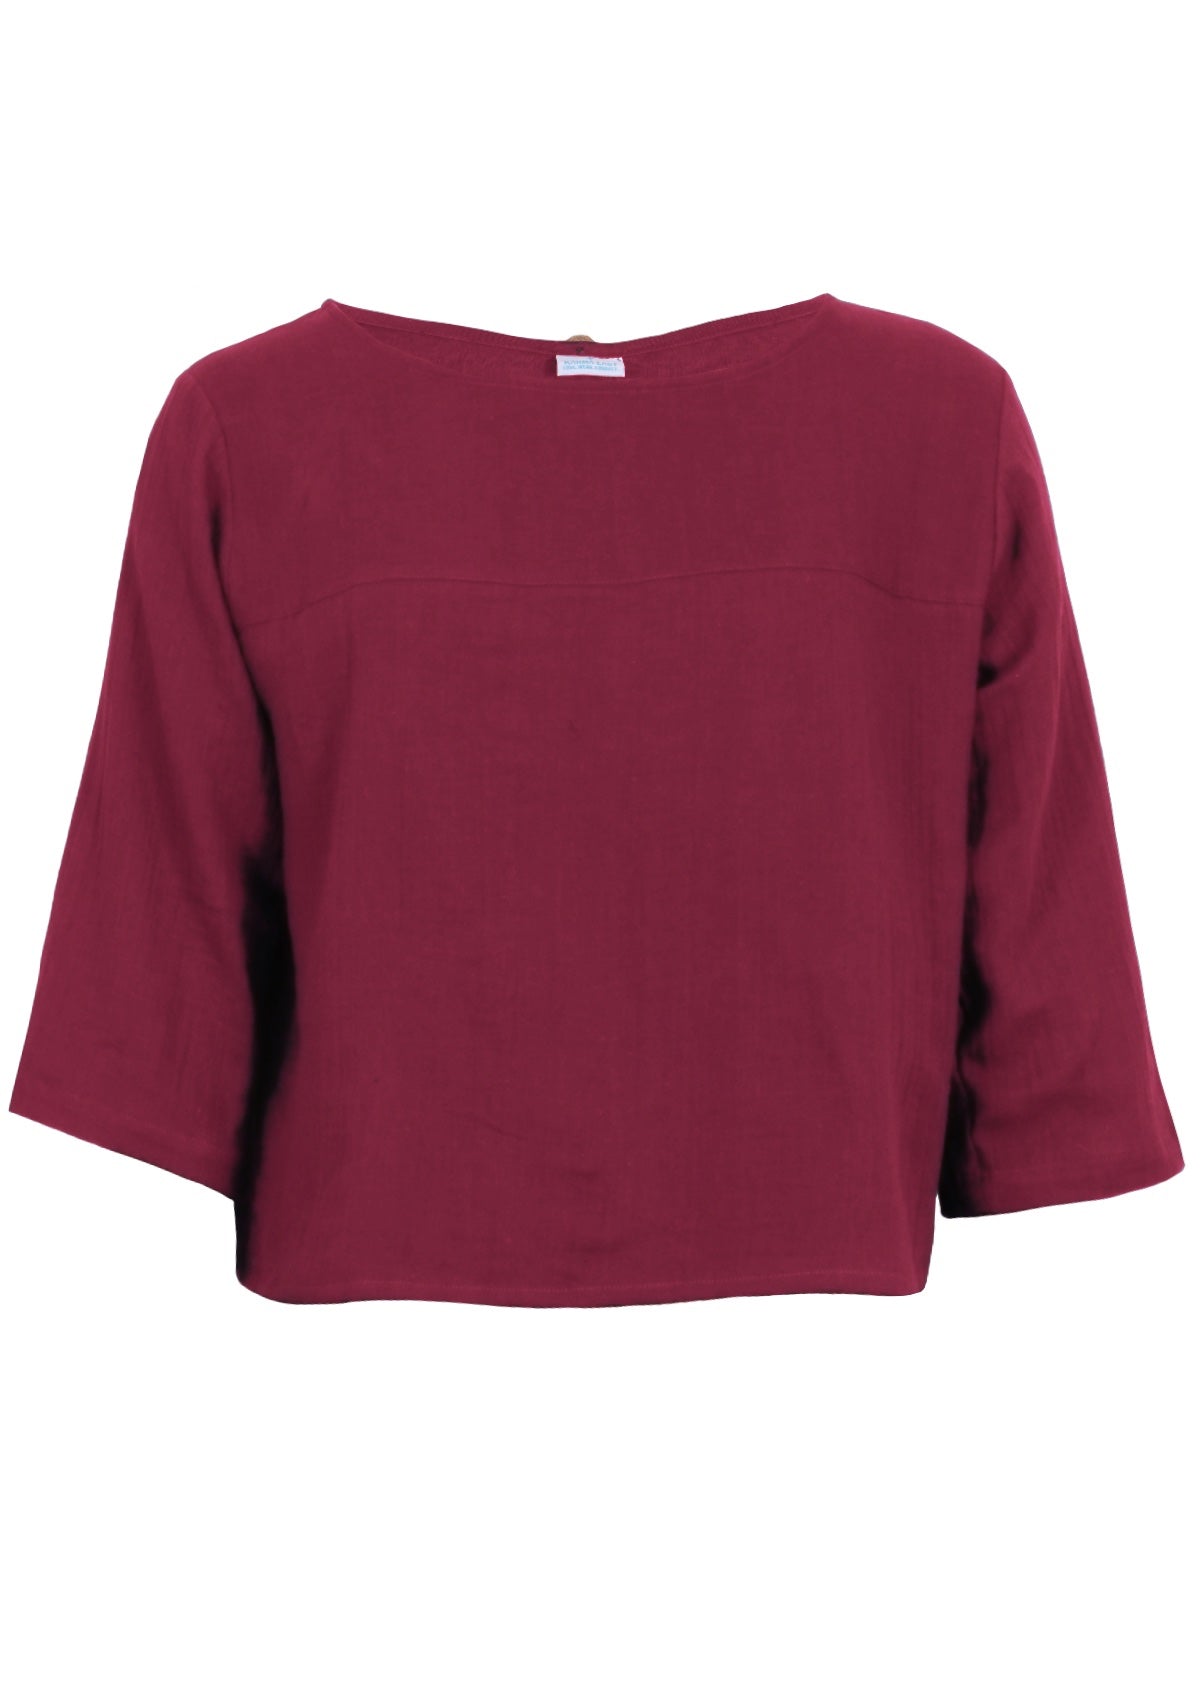 Double cotton top with 3/4 sleeves and high round neckline